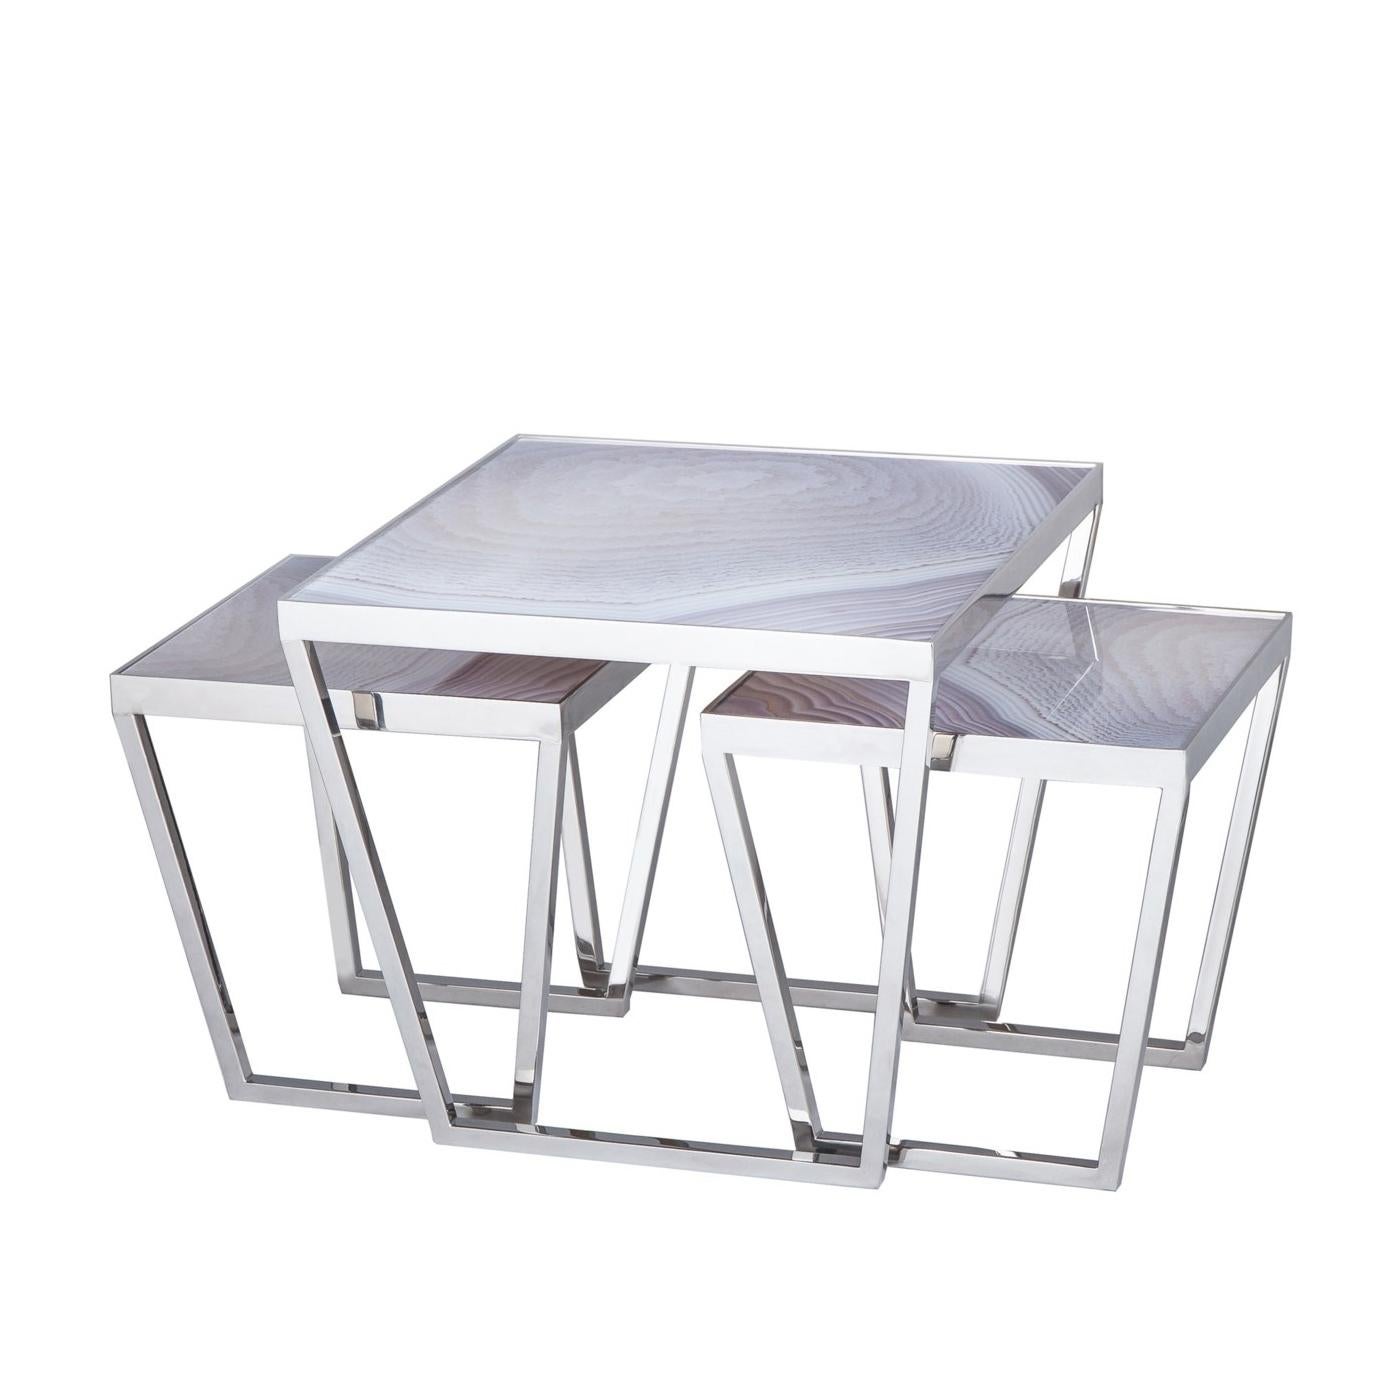 Coffee table printed glass set of 3 with structure
in polished stainless steel. With glass top printed
in taupe agate finish.